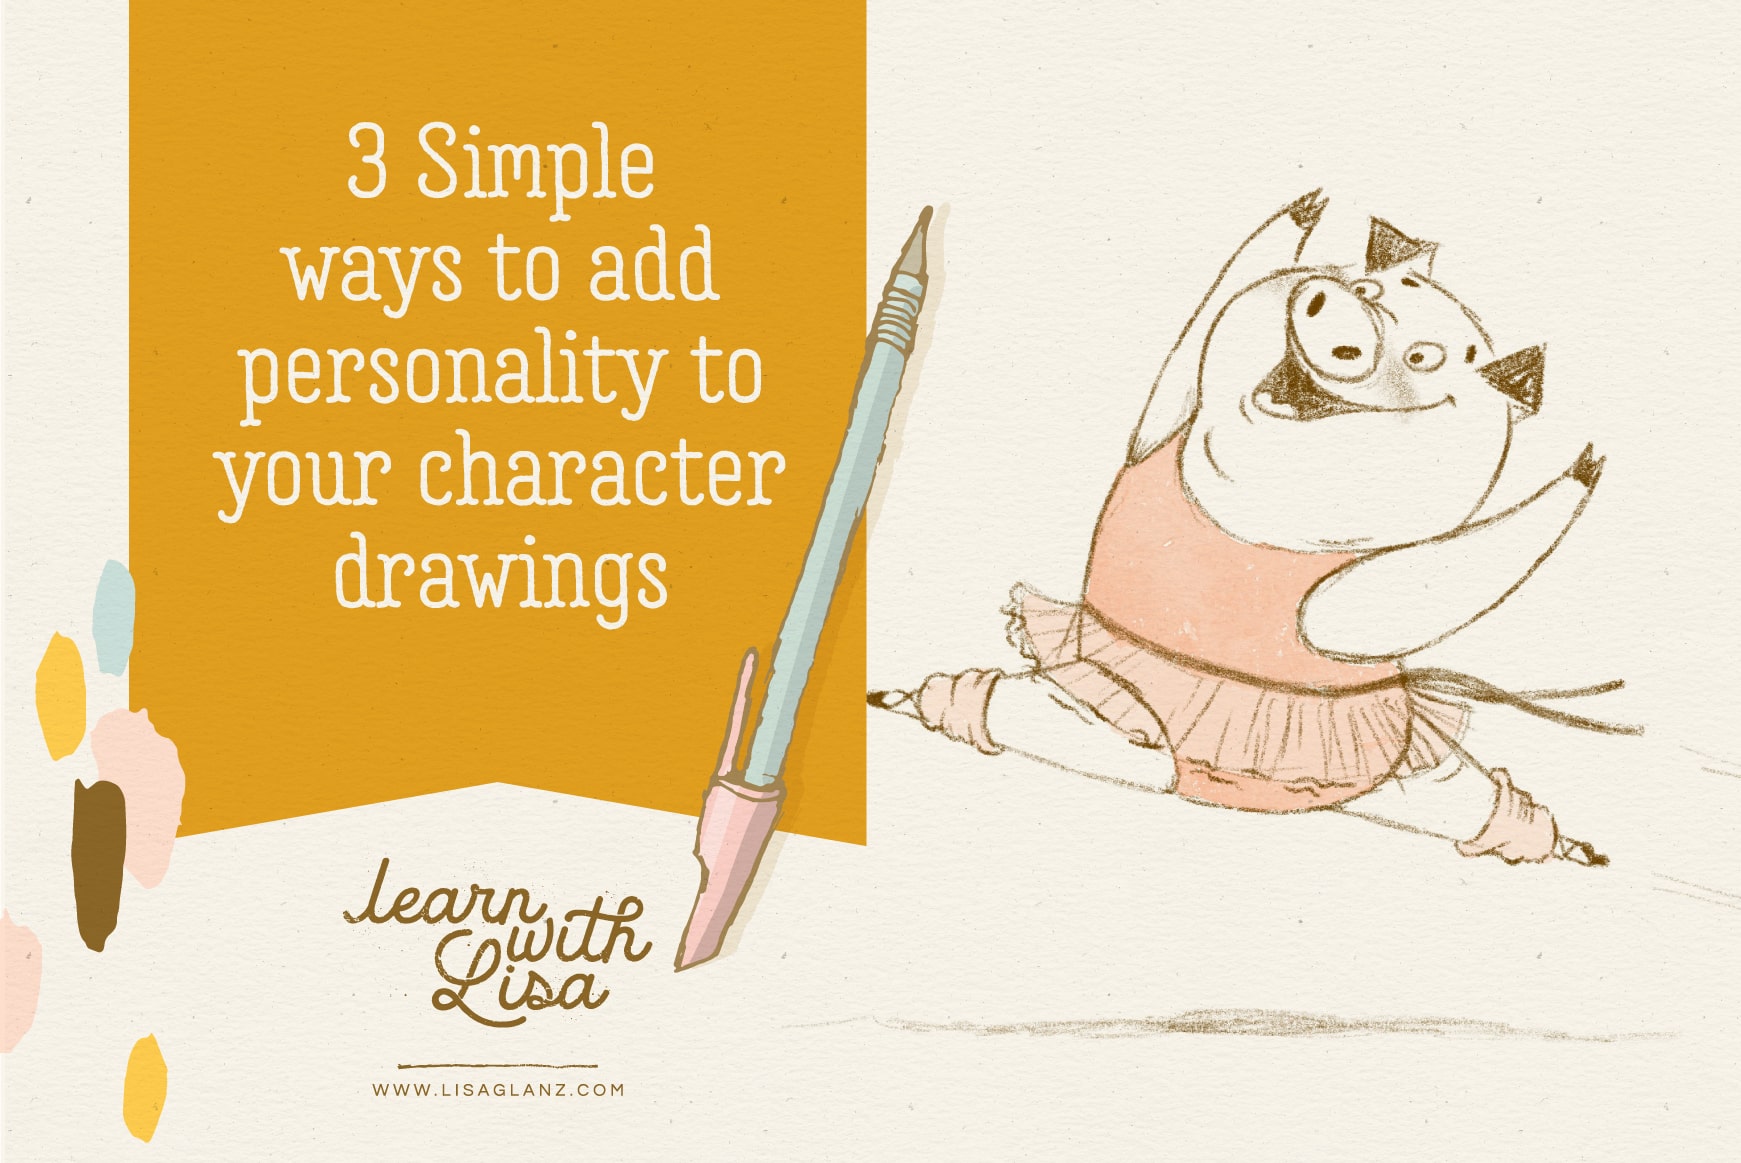 How to add personality to your character drawings